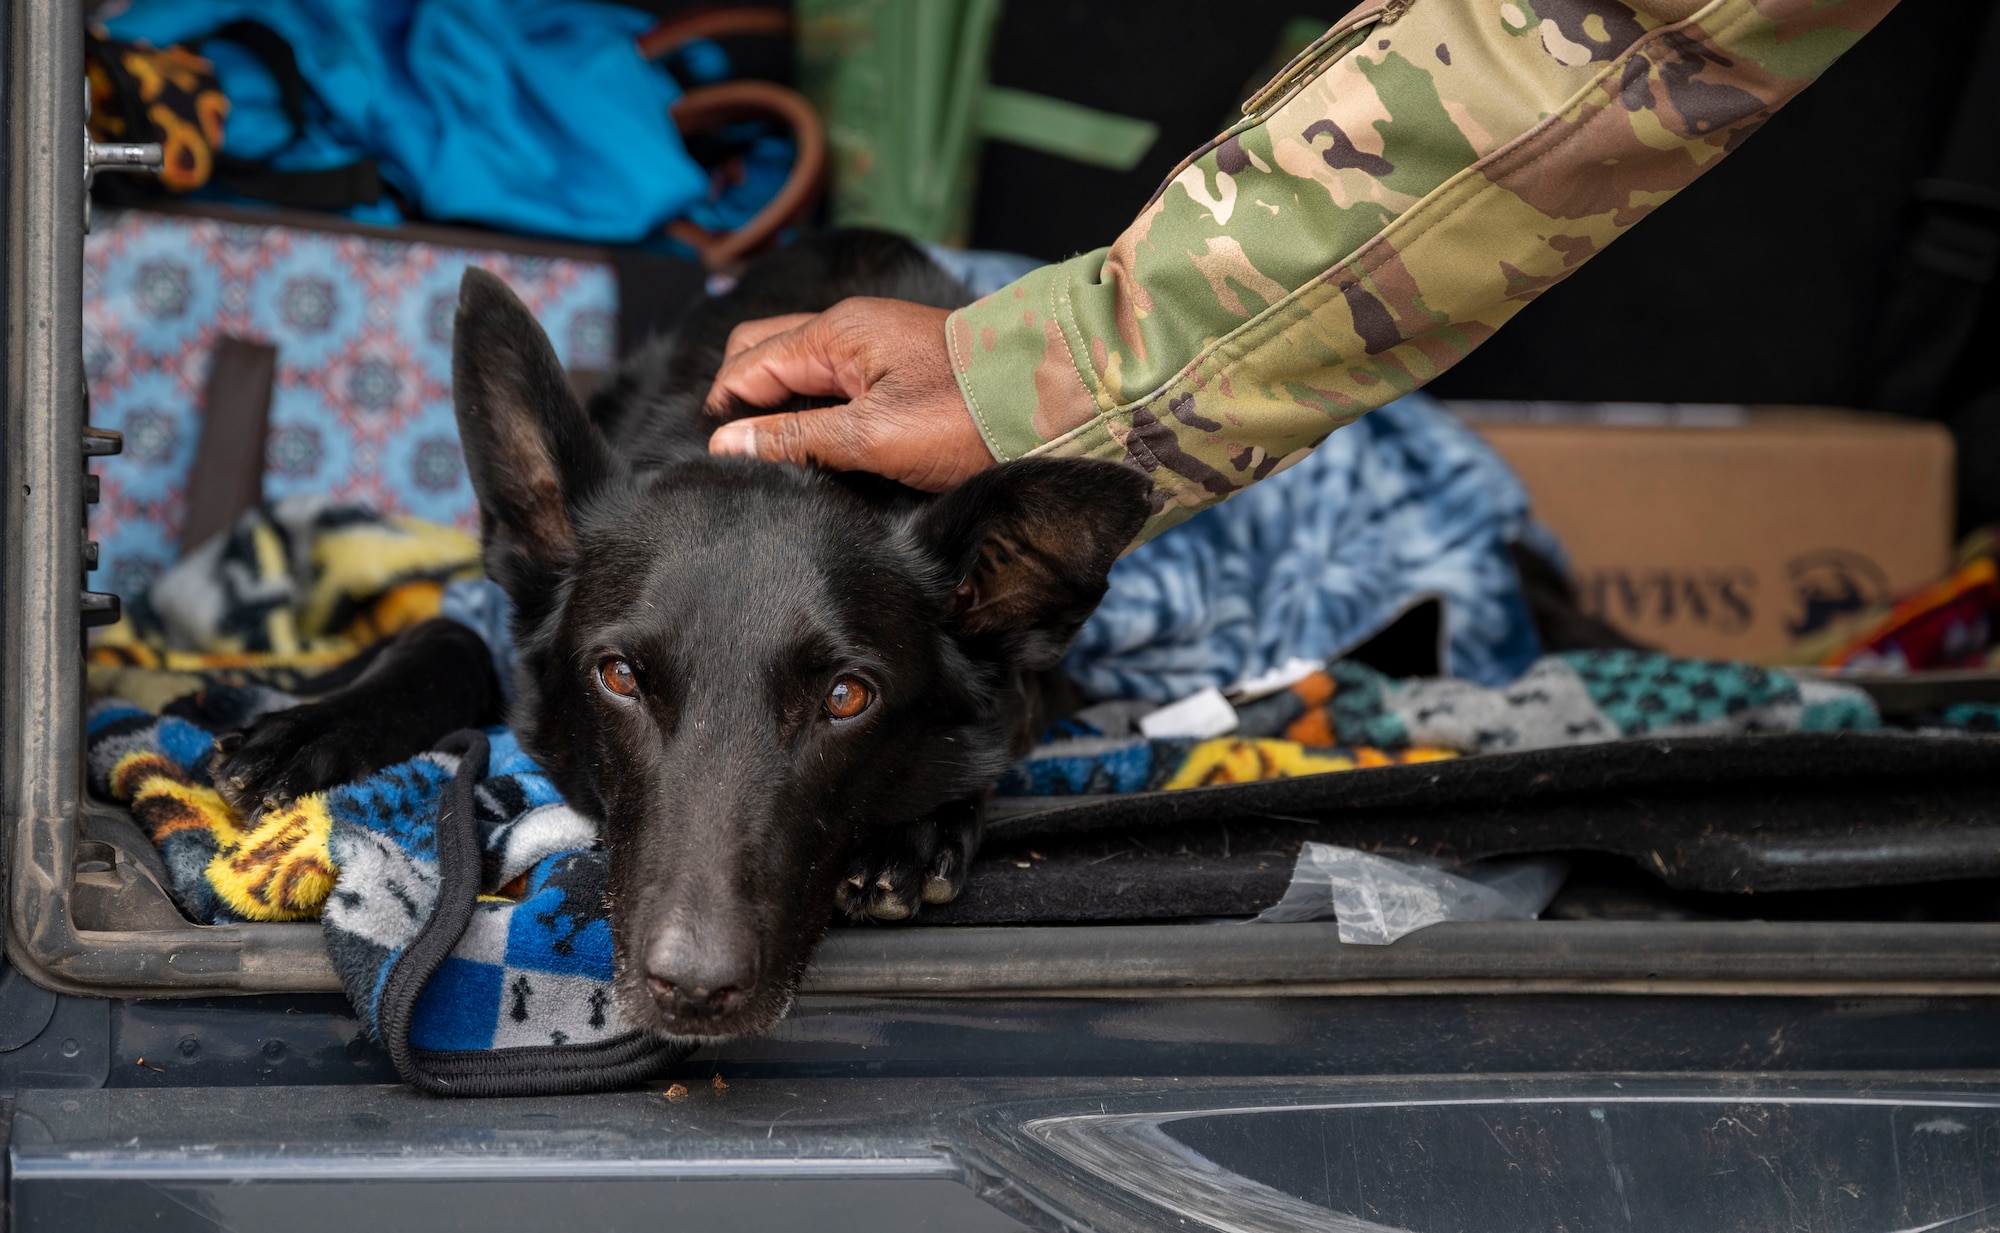 Retired Military Working Dog Kali sits in the trunk of a car at Dover Air Force Base, Delaware, April 22, 2021. Following seven years of service, Kali was humanely euthanized after suffering from a tumor in her abdomen. (U.S. Air Force photo by Airman 1st Class Cydney Lee)